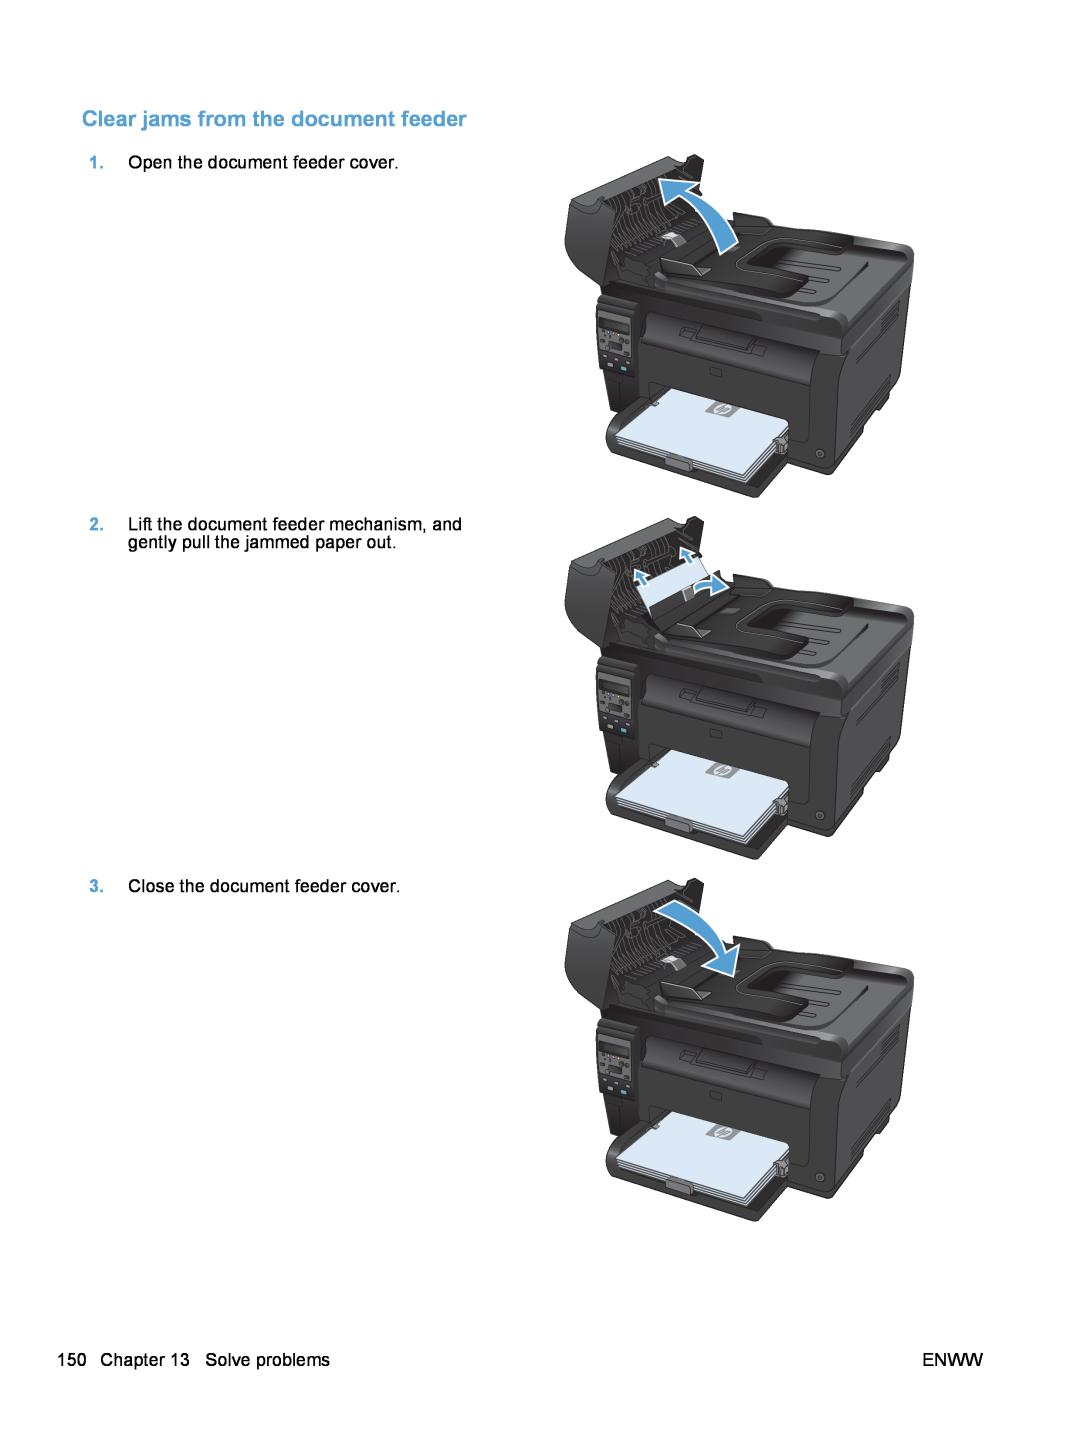 HP 100 CE866ARBGJ Clear jams from the document feeder, Open the document feeder cover, Close the document feeder cover 